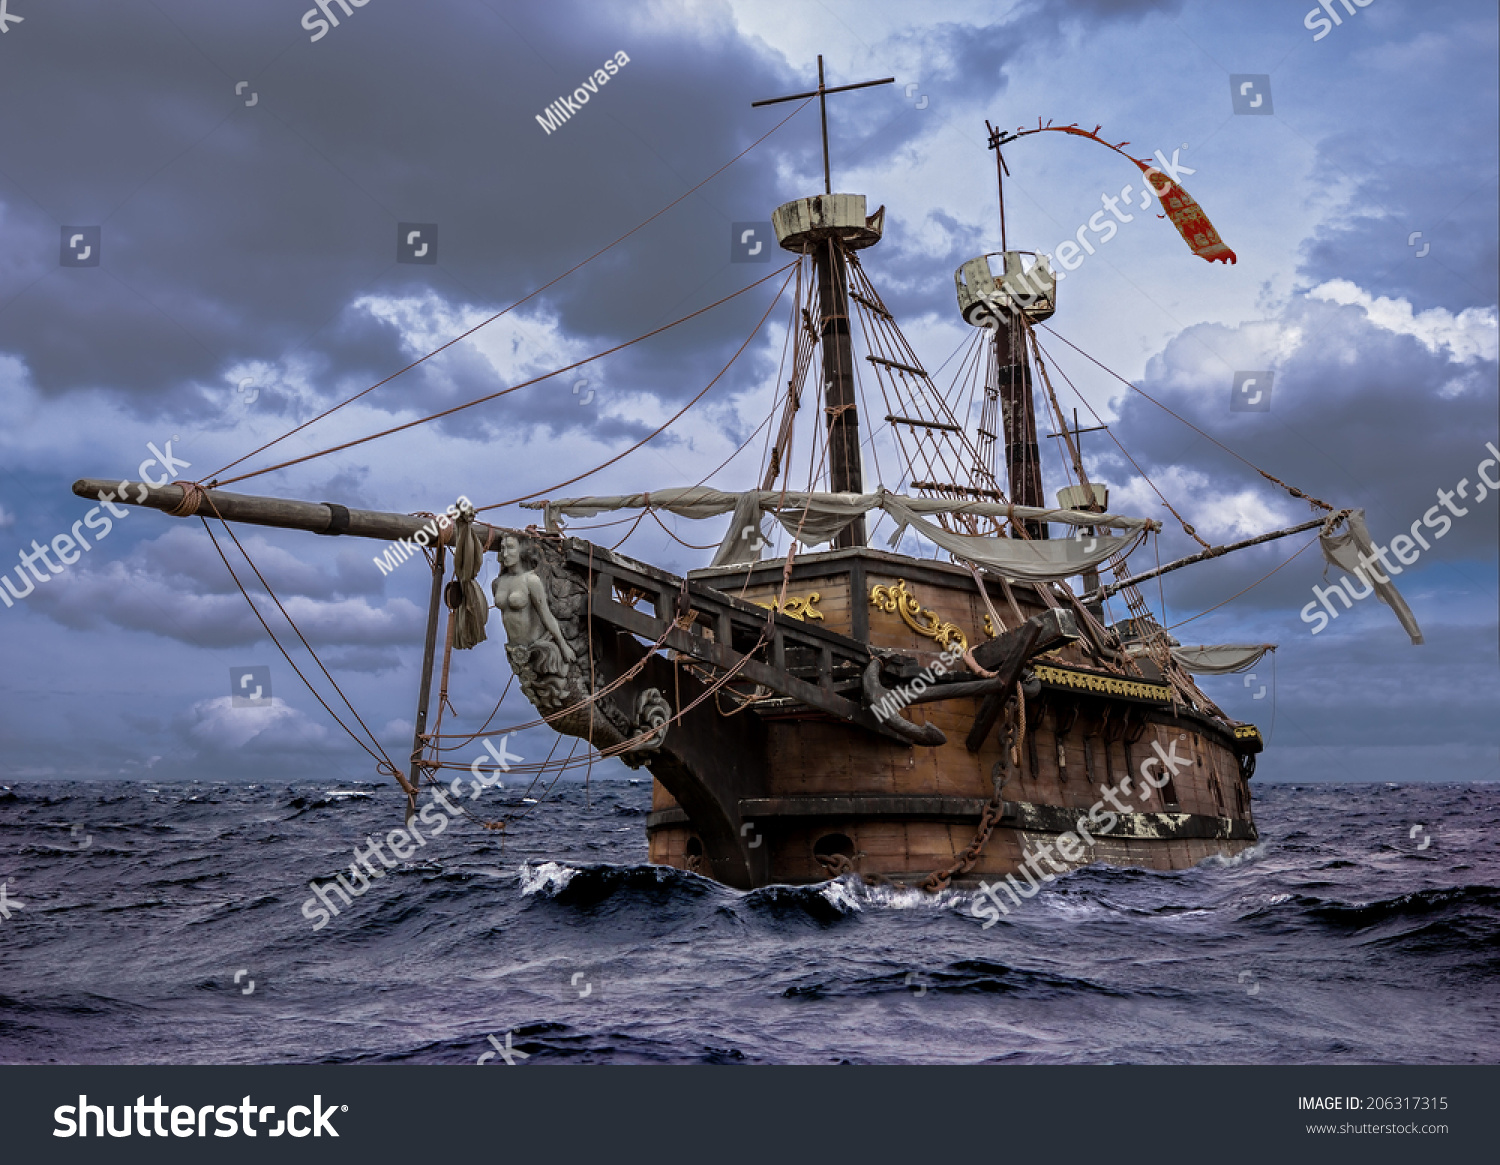 Abandoned historic sailing ship in the stormy sea. Wooden sailboat sails in a storm at sea.  A mysterious boat in stormy ocean waves. #206317315